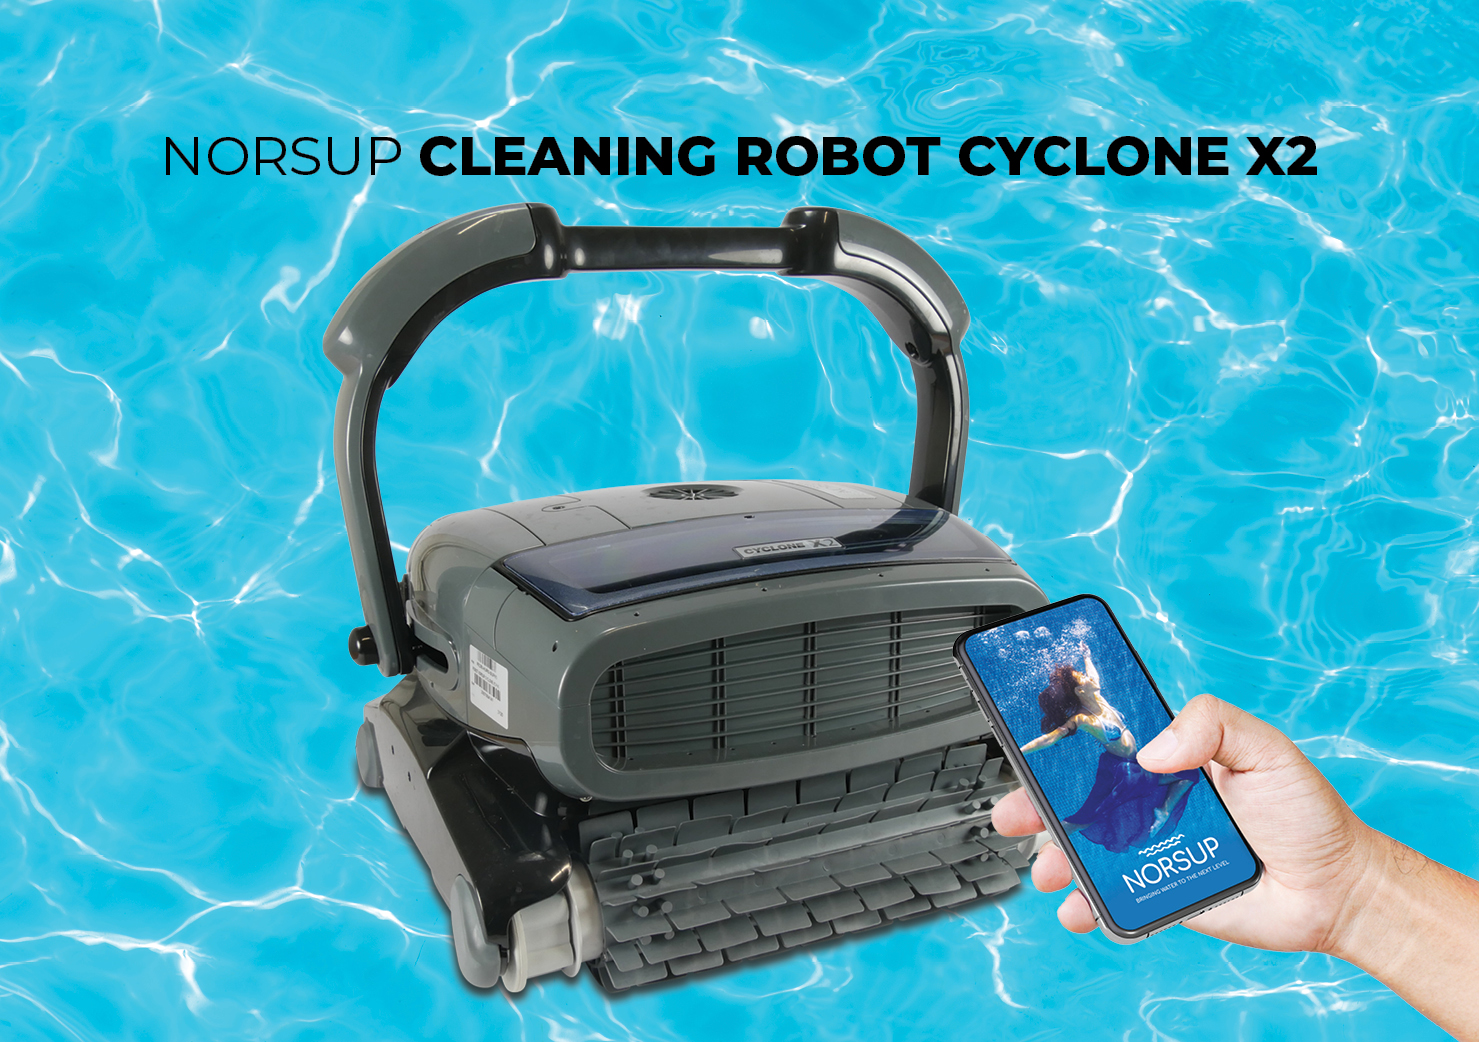 Norsup cleaning robot cyclone X2